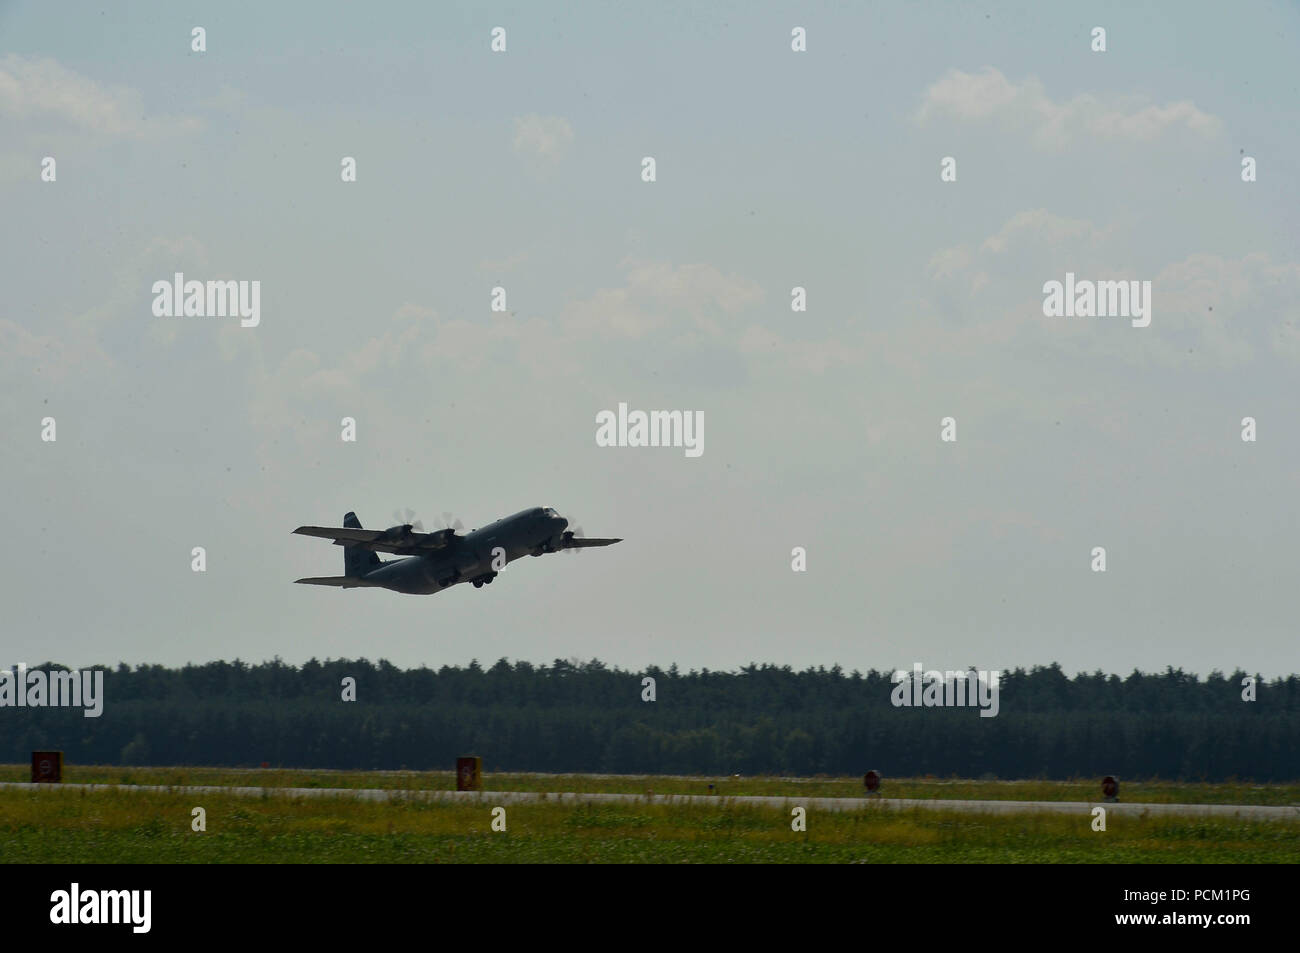 A U.S. Air Force C-130J Super Hercules assigned to the 86th Airlift Wing takes off from Powidz Air Base, Poland, July 31, 2018. Approximately 100 Airmen and three aircraft arrived in Poland to conduct bilateral training exercises with the Polish Air Force. (U.S. Air Force photo by Senior Airman Joshua Magbanua) Stock Photo